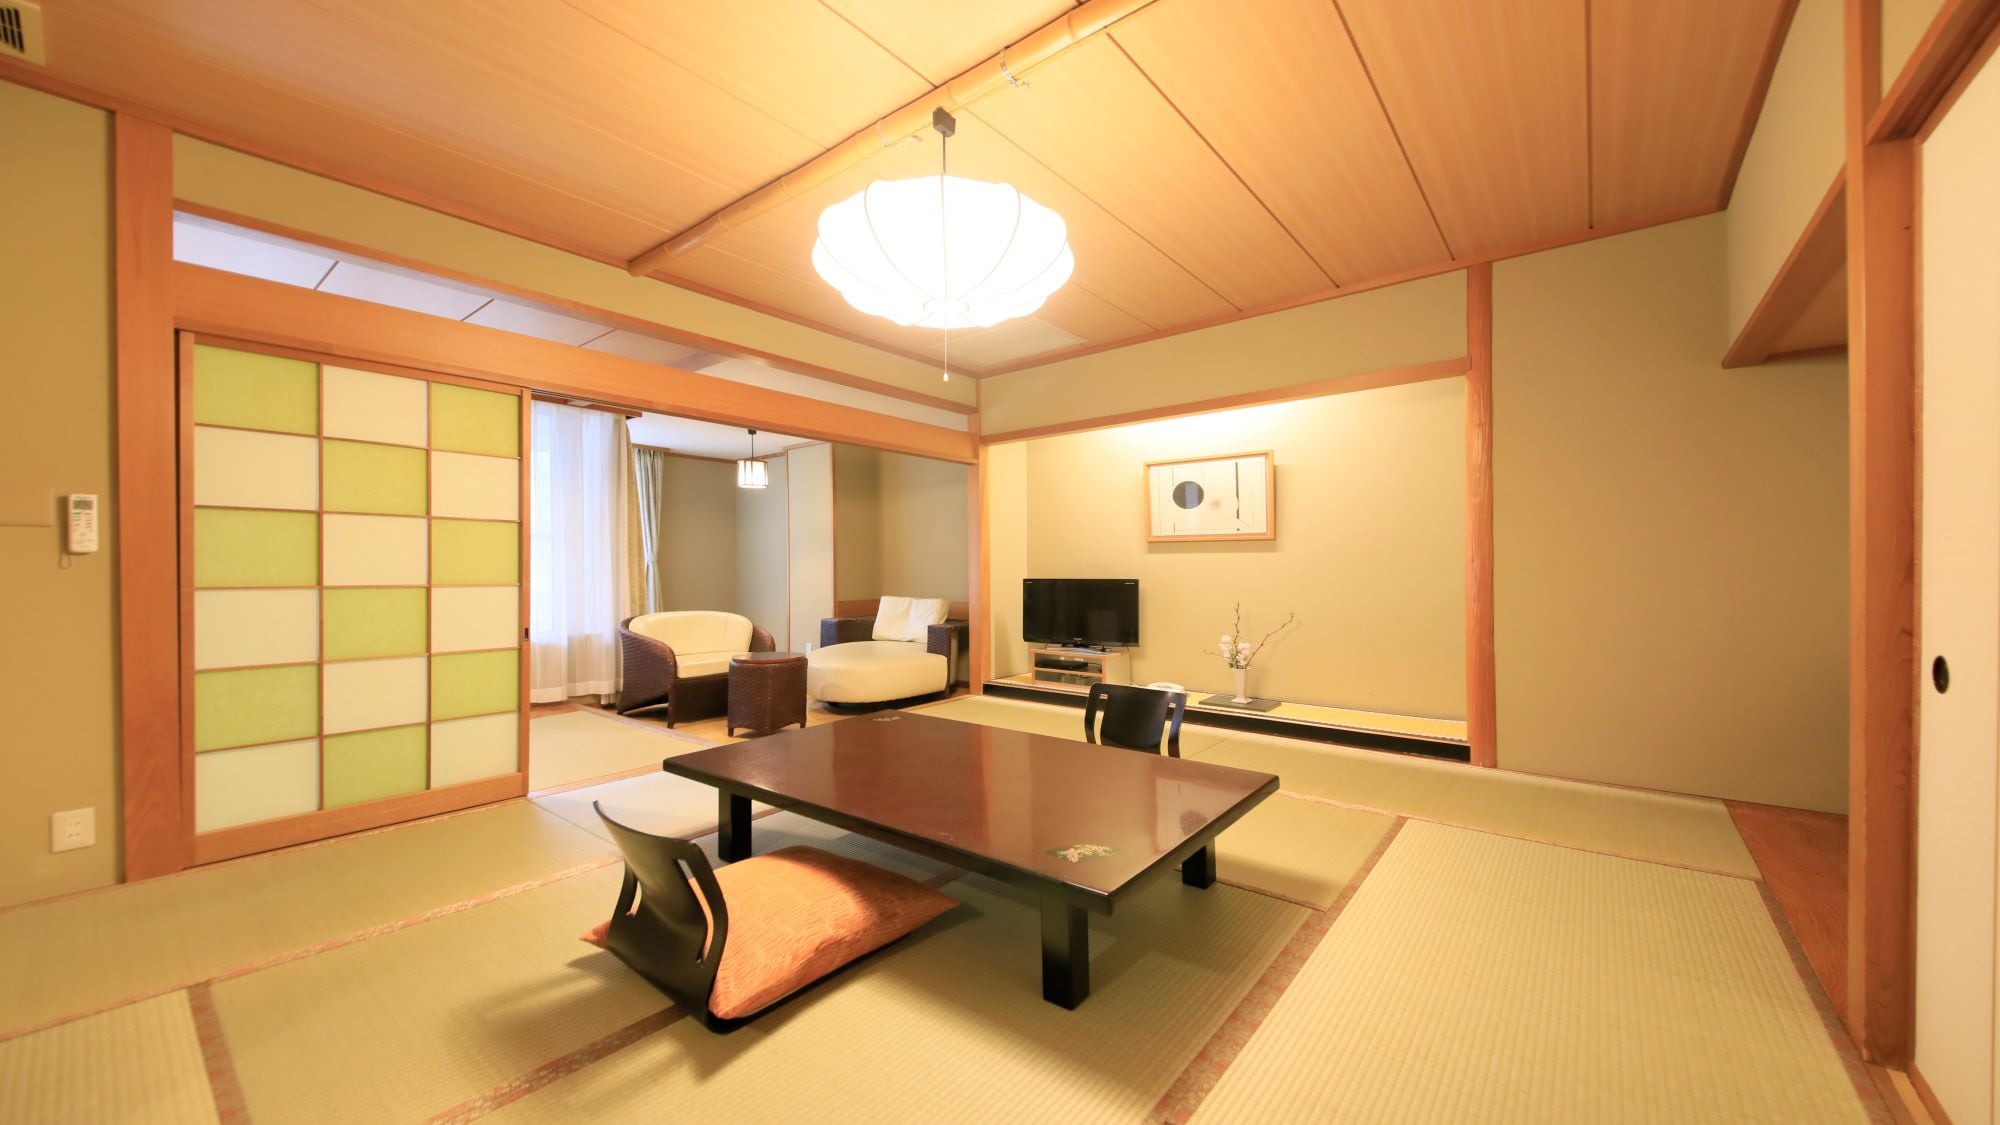 A slightly larger Japanese-style room with 10 to 15 tatami mats + wide rim (example) can be used by up to 6 people.